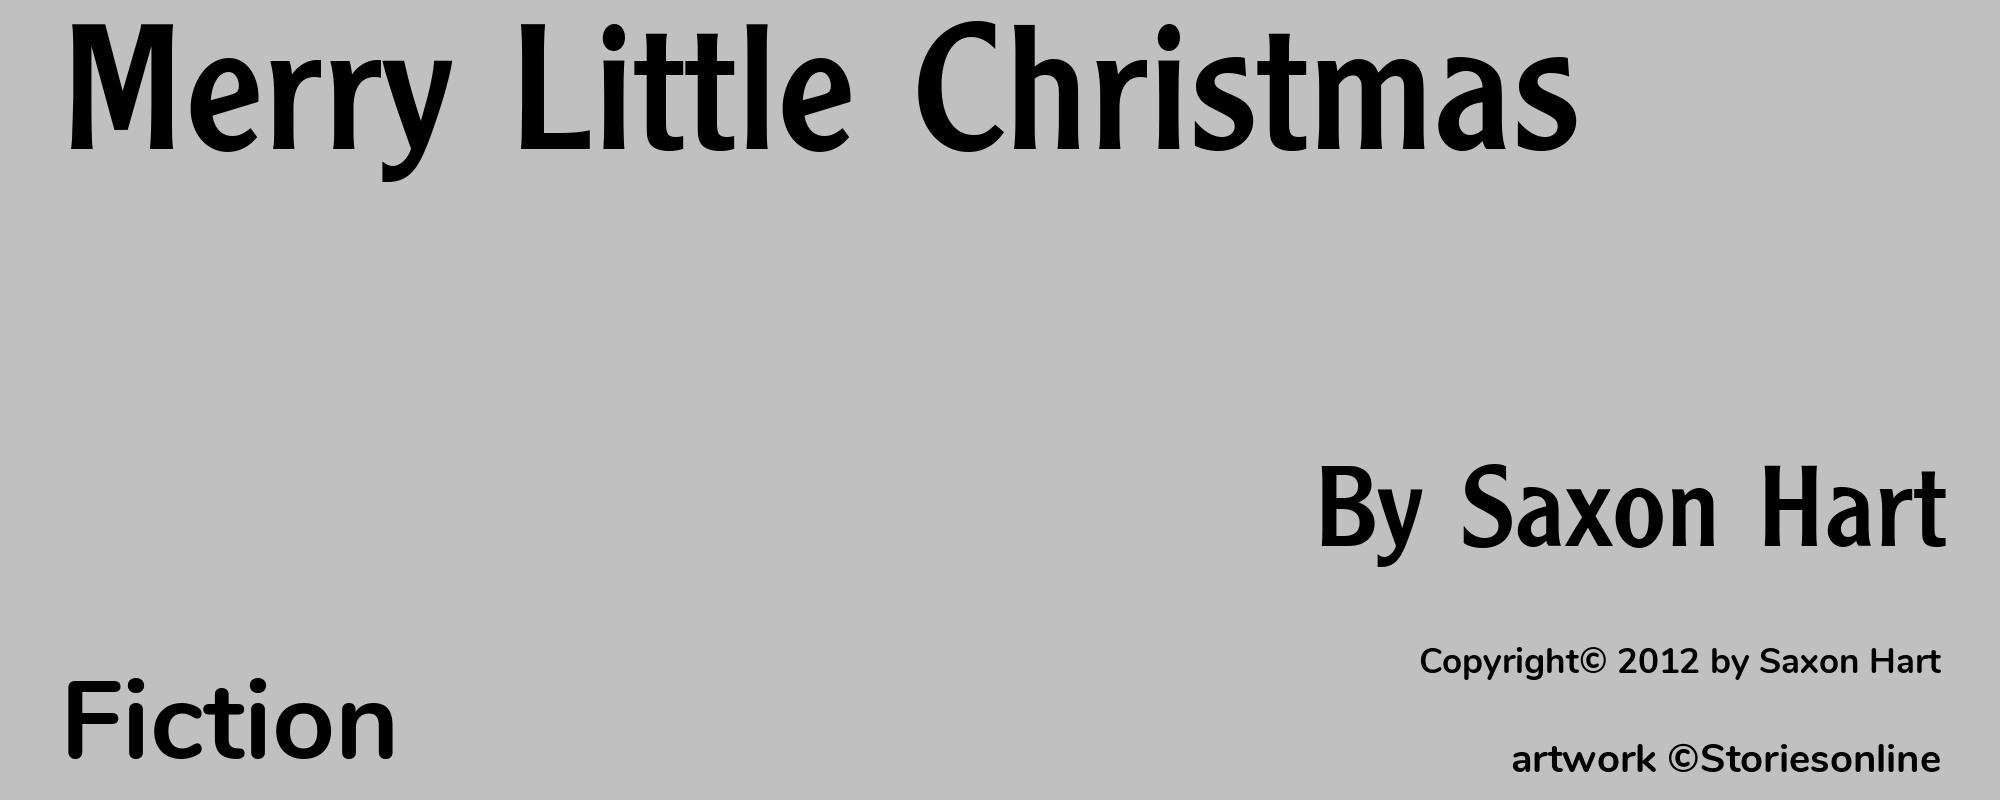 Merry Little Christmas - Cover